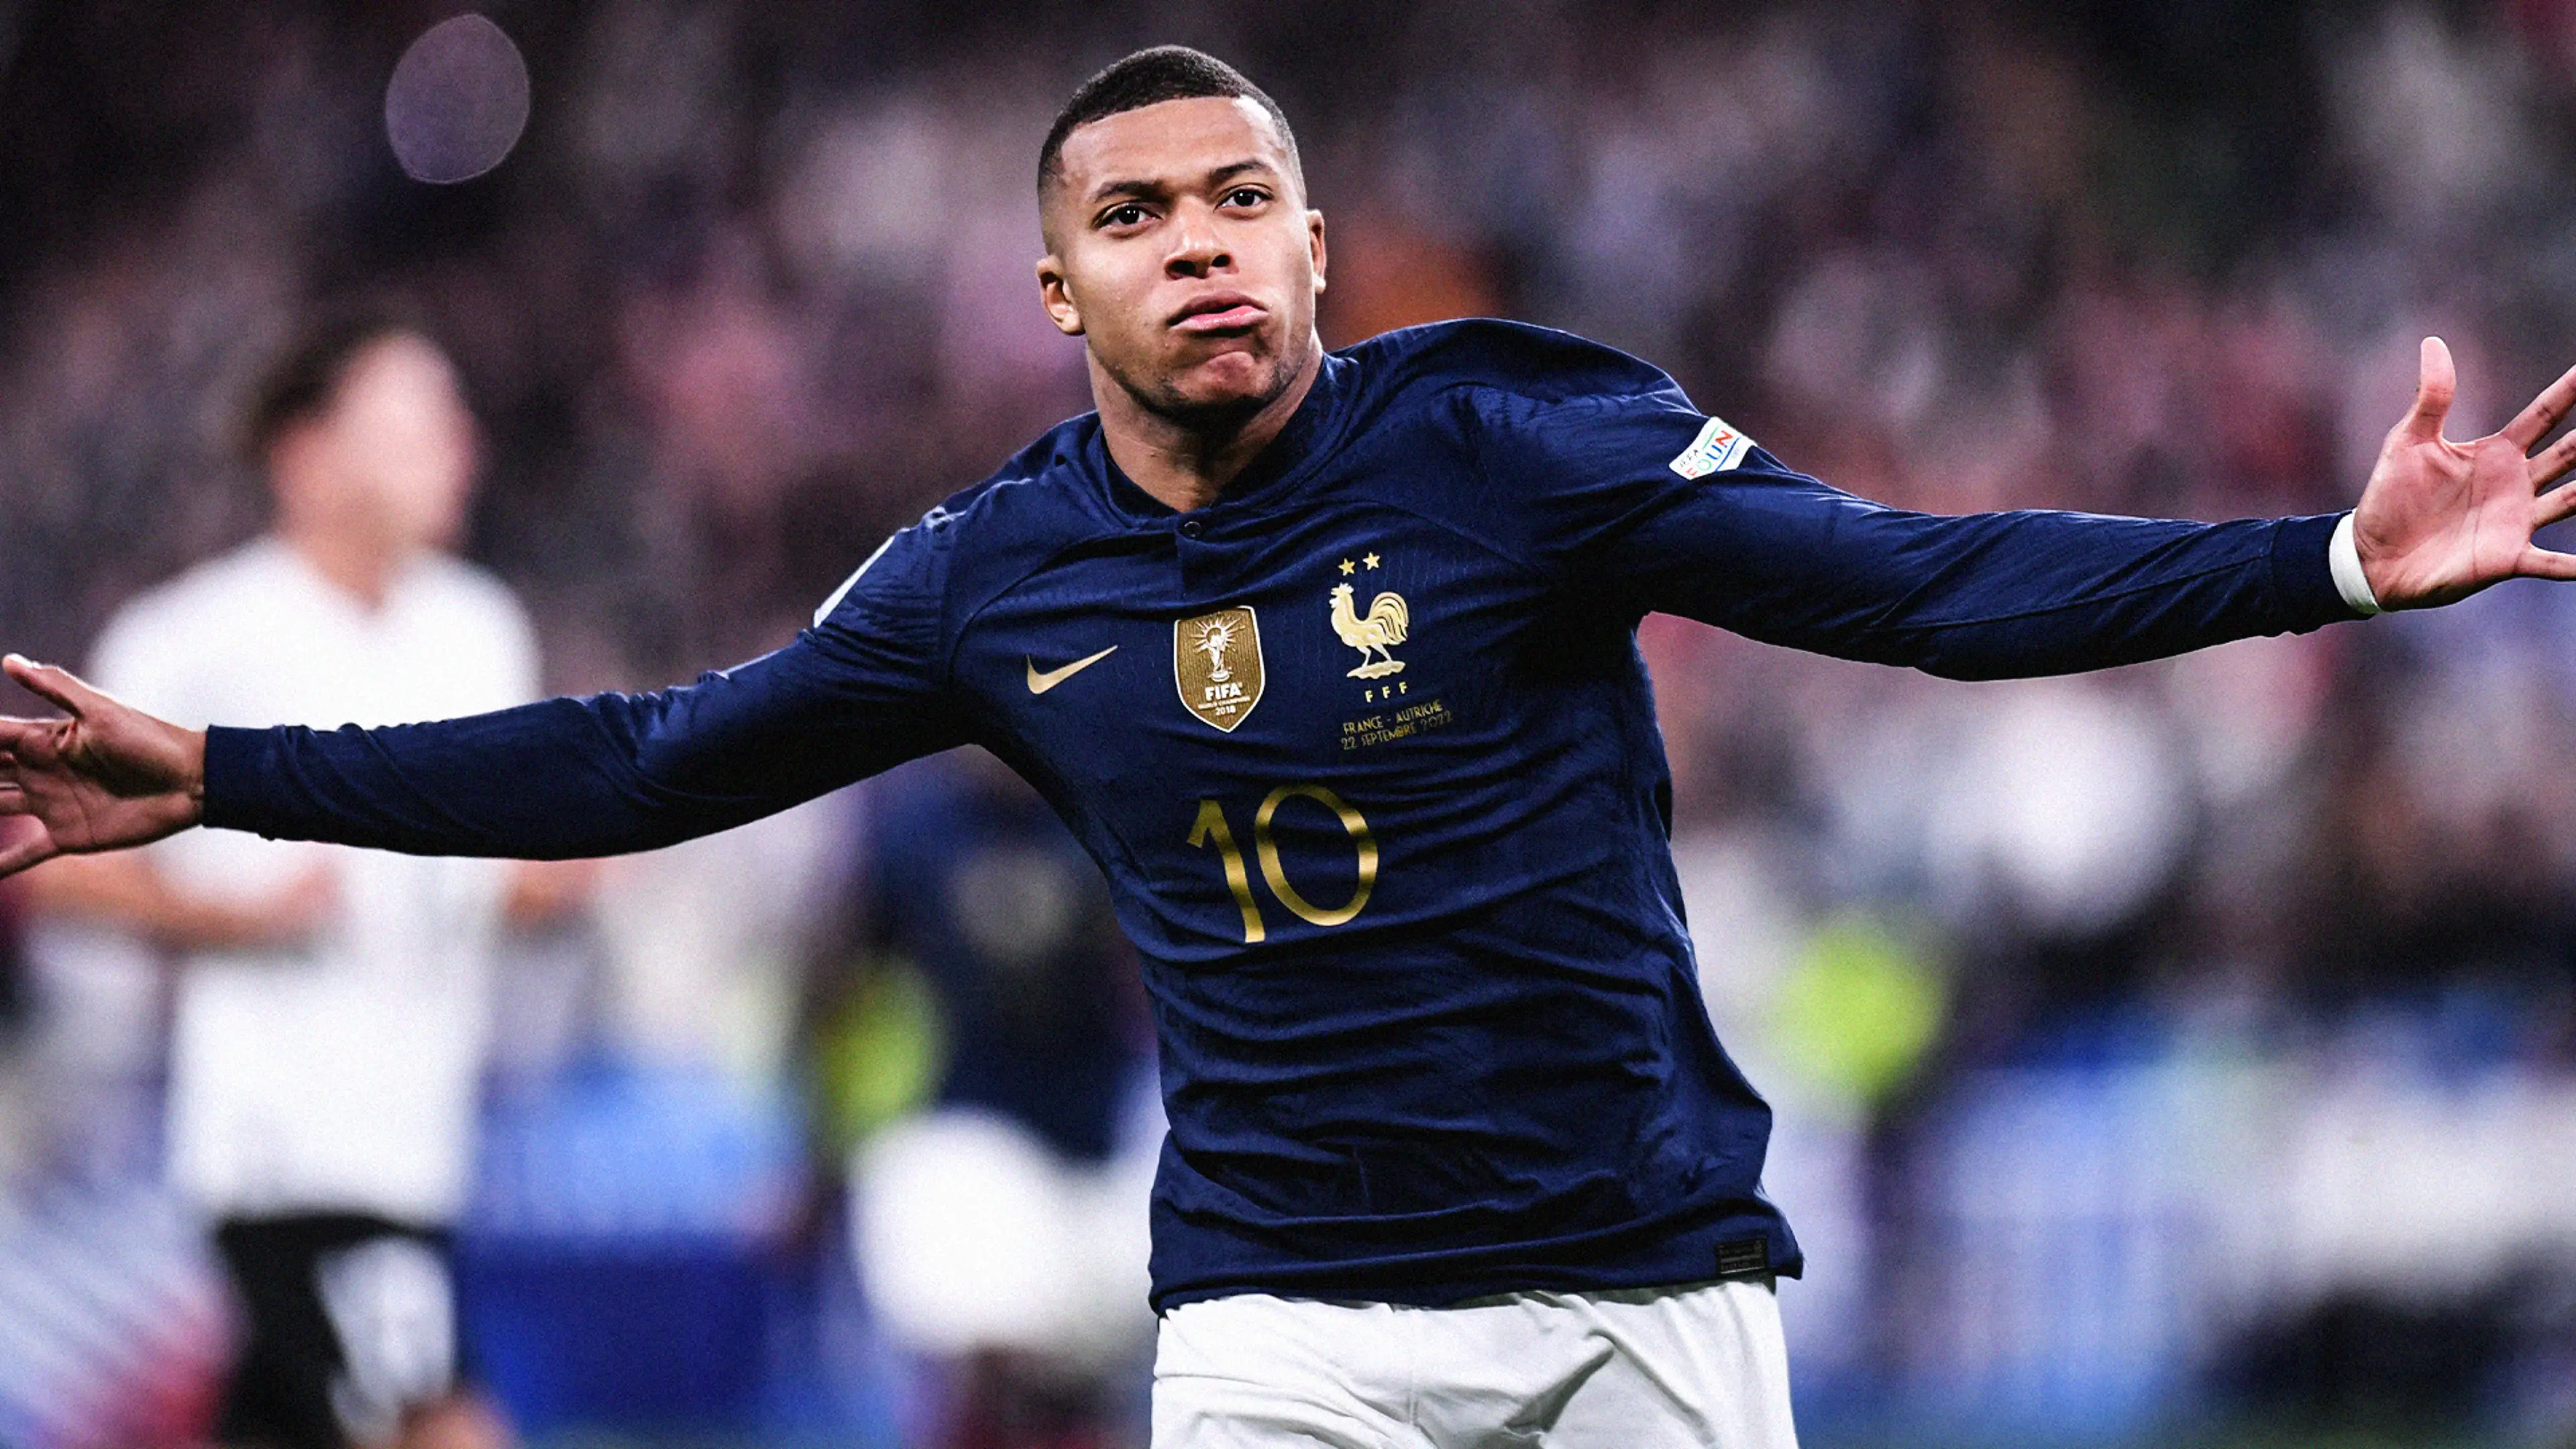 Kylian Mbappé Breaks Henri's Champions League Record By Scoring In Eight Consecutive Home Matches